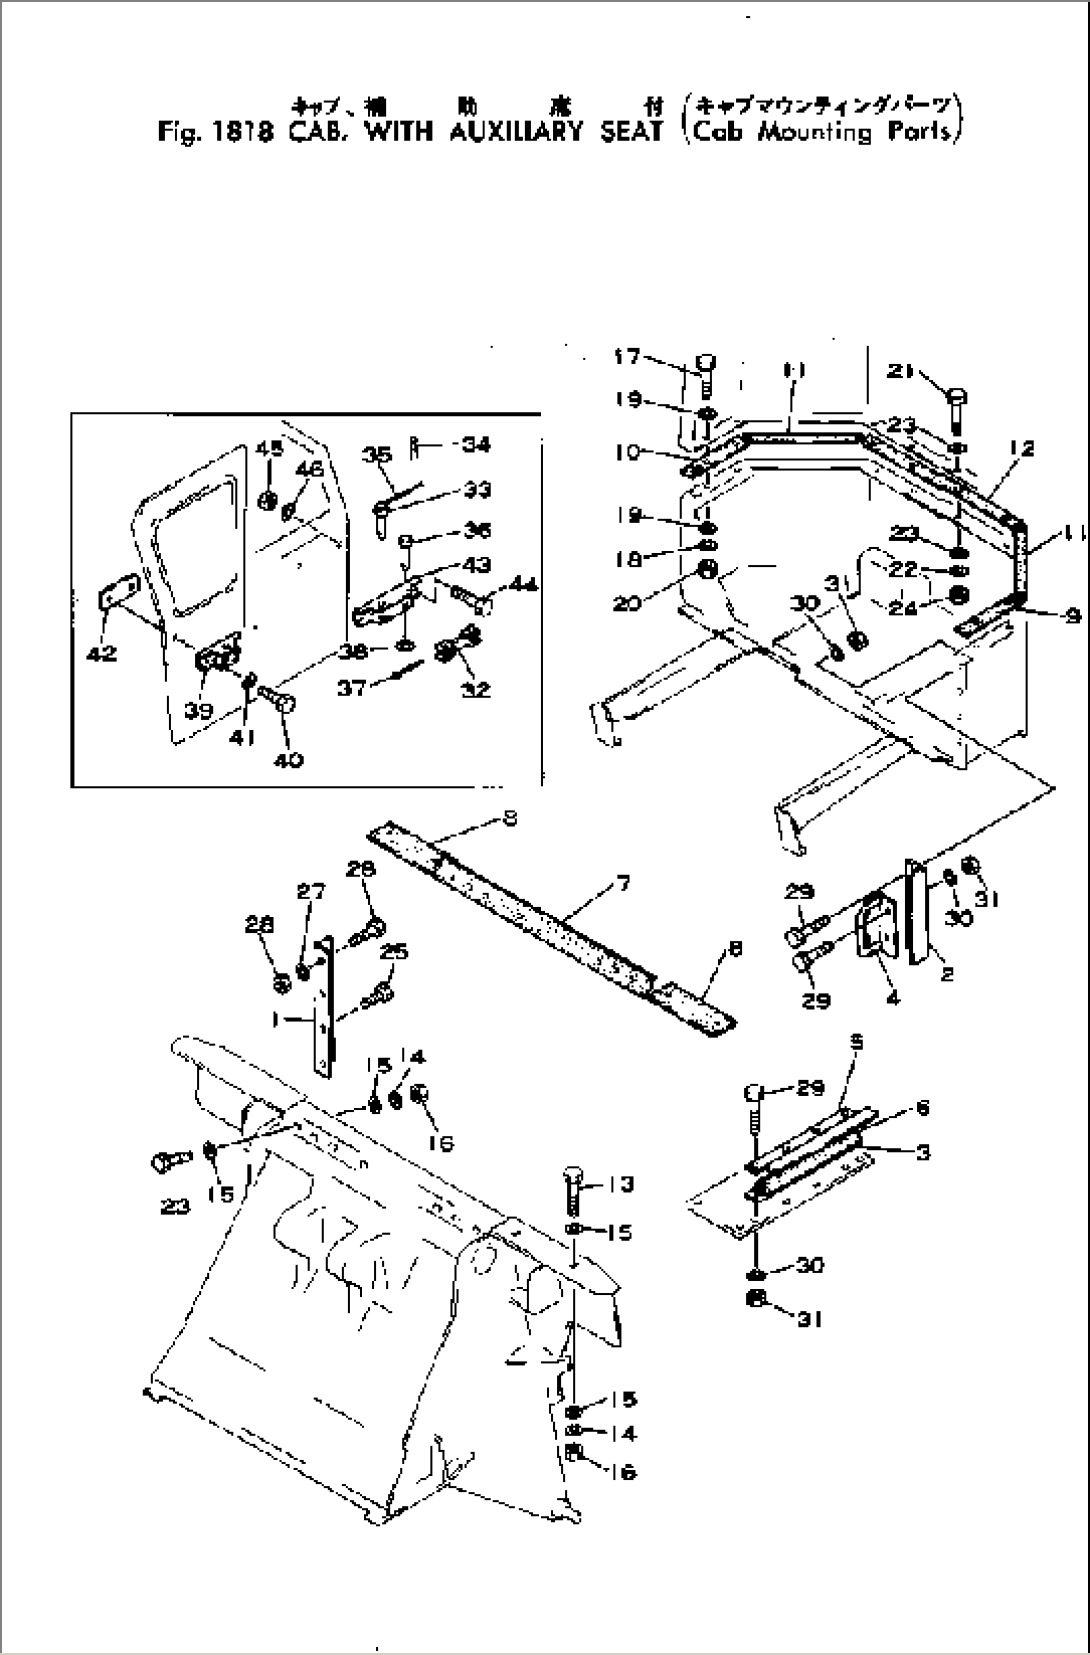 CAB¤ WITH AUXILIARY SEAT (CAB MOUNTING PARTS)(#3-)